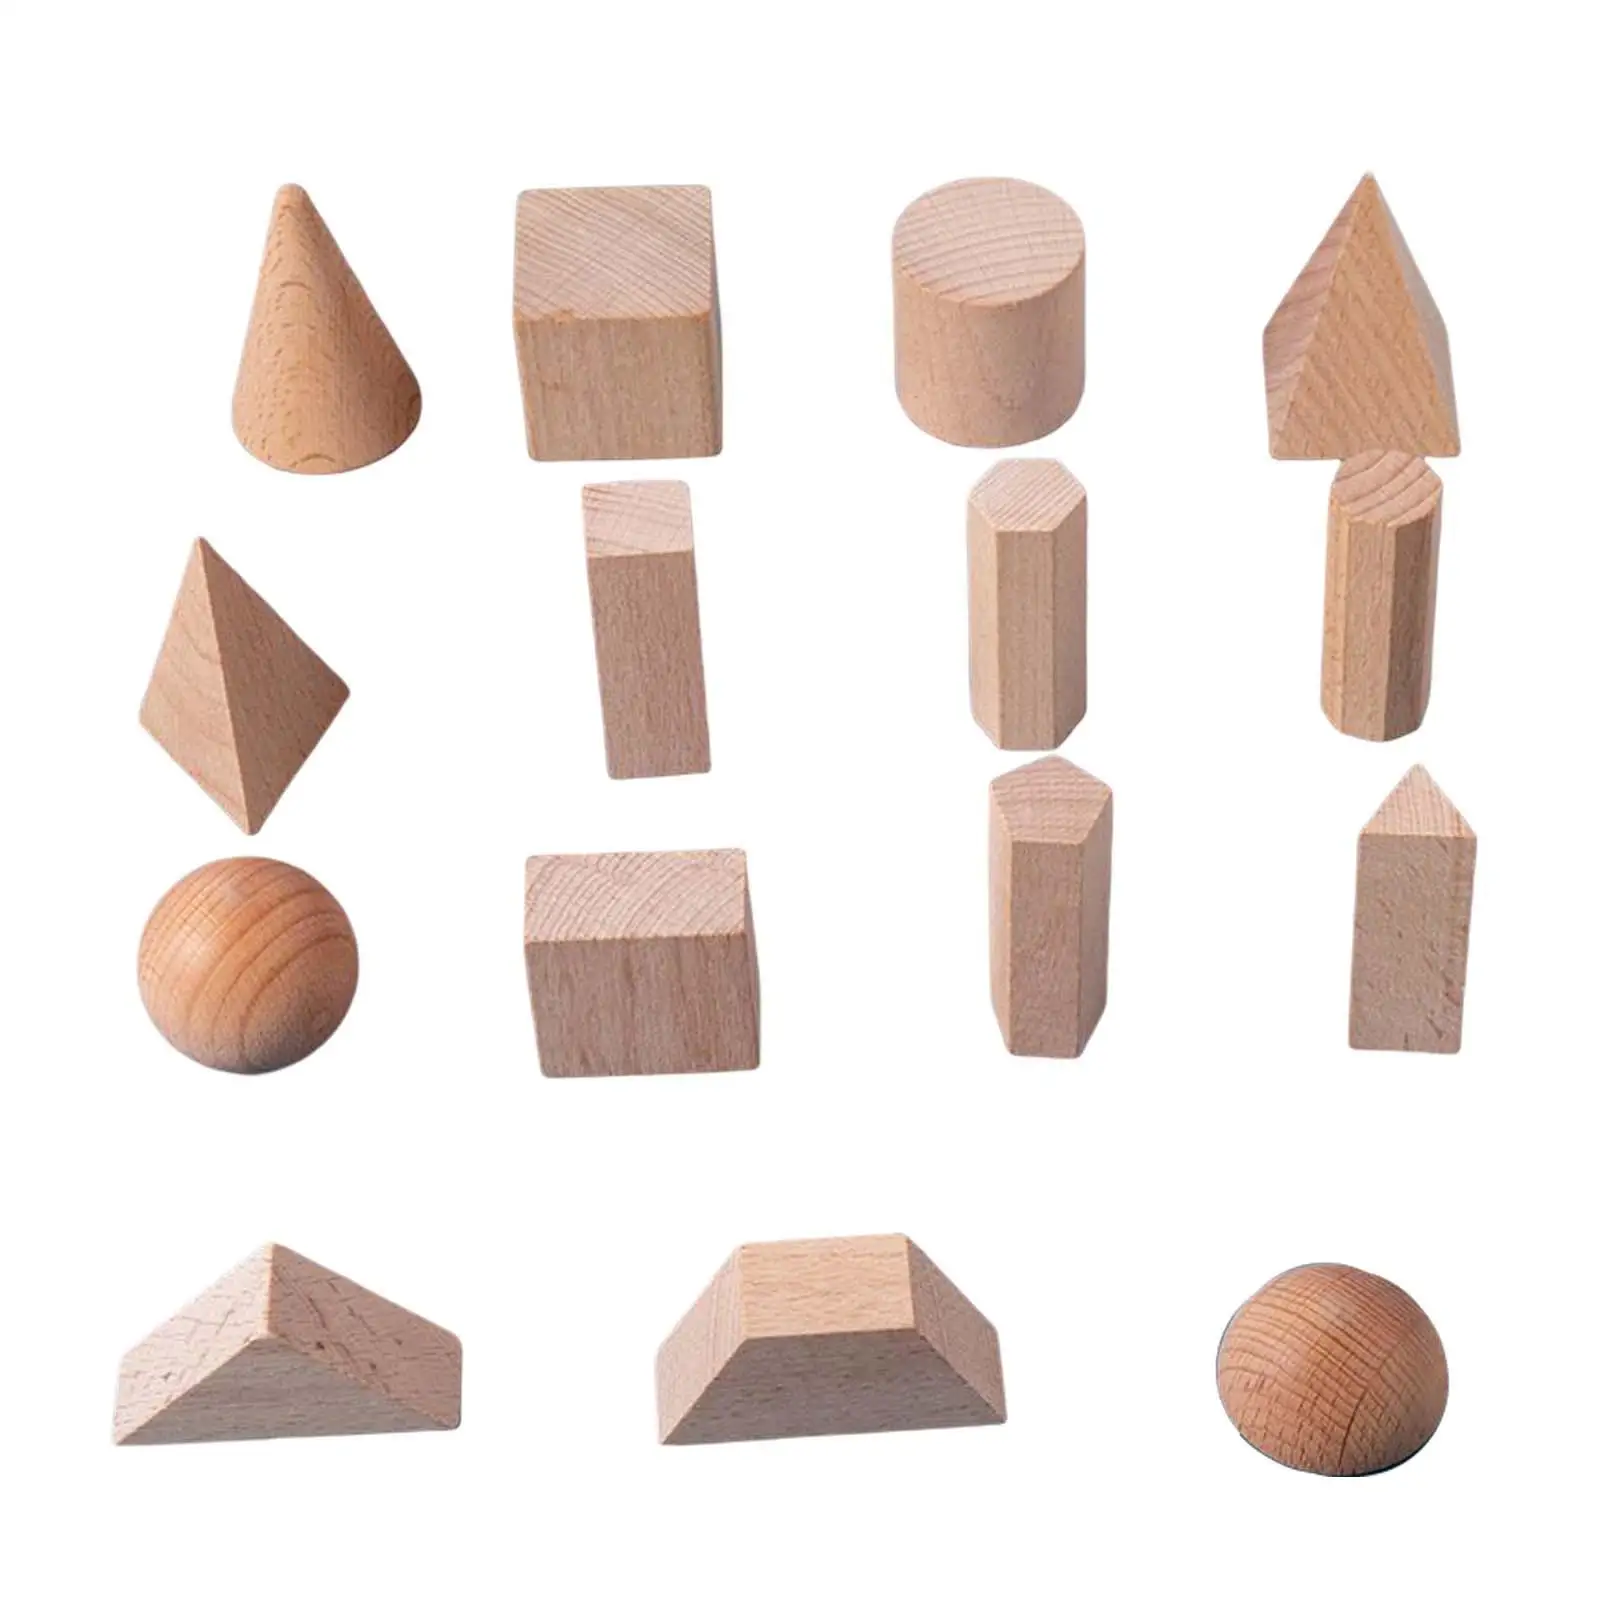 15x Wood Geometric Solids,Learning Education Math Toys,Montessori 3D Shapes Stacking Toy for Toddler Ages 2+